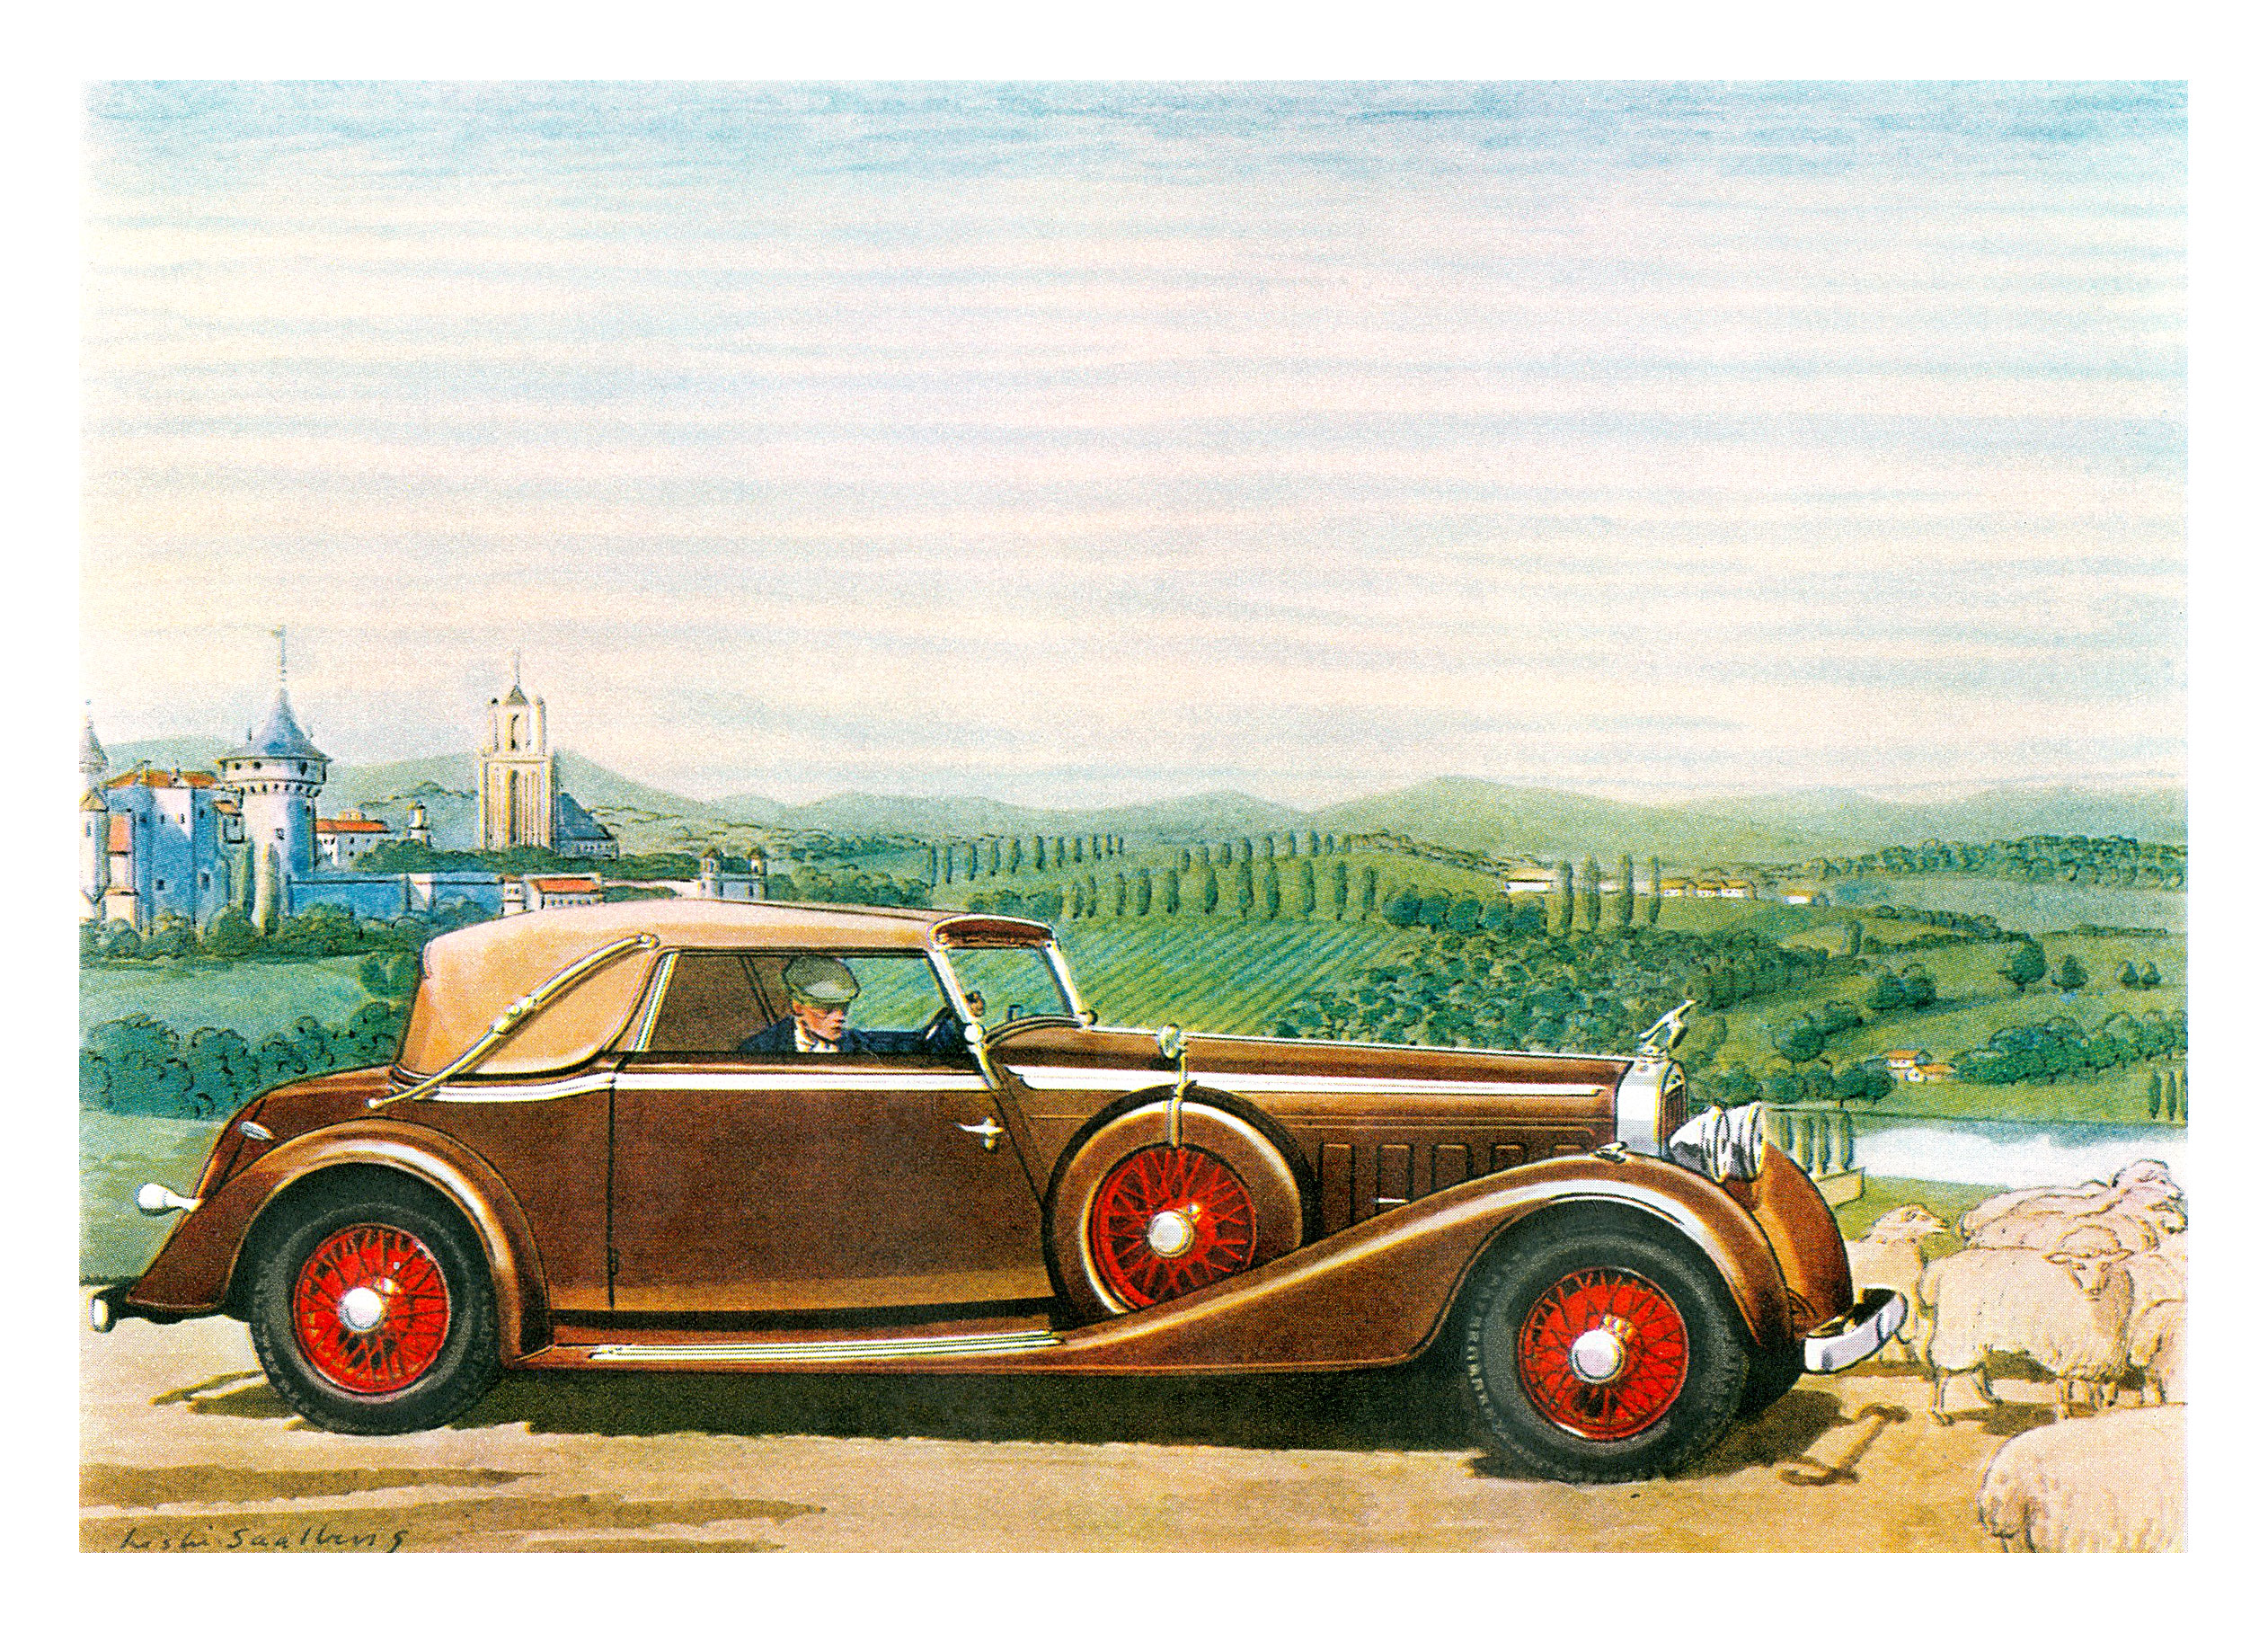 1935 Hispano-Suiza Convertible Coupe - Illustrated by Leslie Saalburg